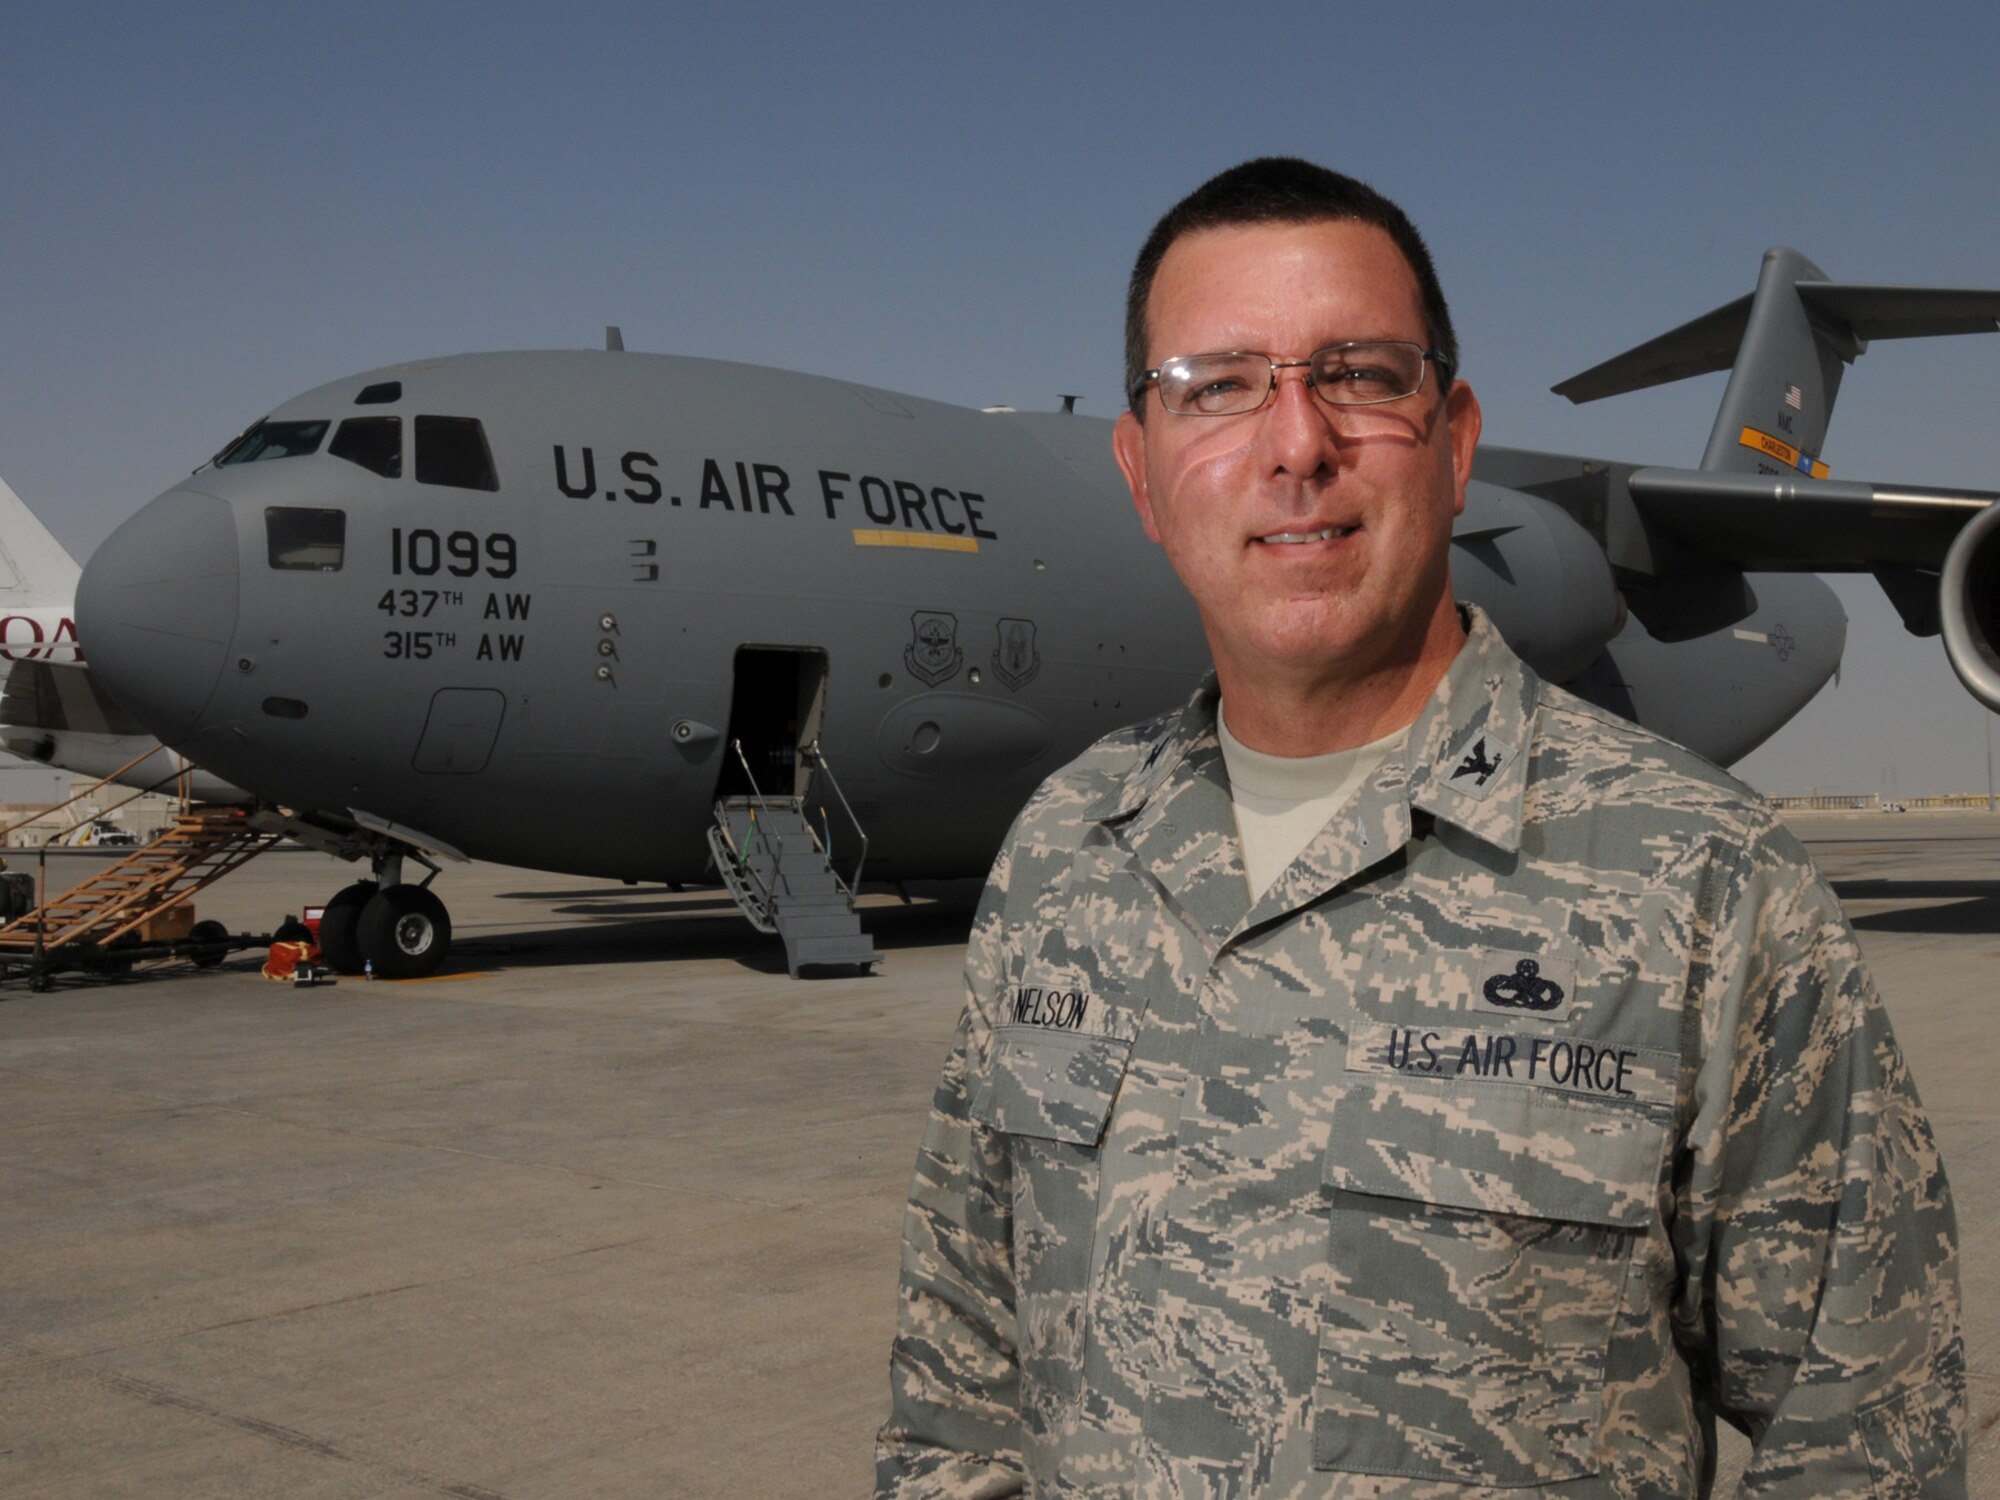 Col. Timothy Nelson, 379th Air Expeditionary Wing director of staff, revisits the C-17 Globemaster III as it reaches its 17-year mark in the Air Force inventory. Colonel Nelson was a member of the acceptance committee for this airframe while serving as an active-duty first lieutenant in the early 1990s. The committee was responsible for ensuring the new aircraft met Air Force needs and specifications. Colonel Nelson is a member of the U.S. Air Force Reserve deployed from Andrews Air Force Base, Md. in support of operations Iraqi Freedom and Enduring Freedom. (U.S. Air Force Photo/Tech. Sgt. Jason W. Edwards)